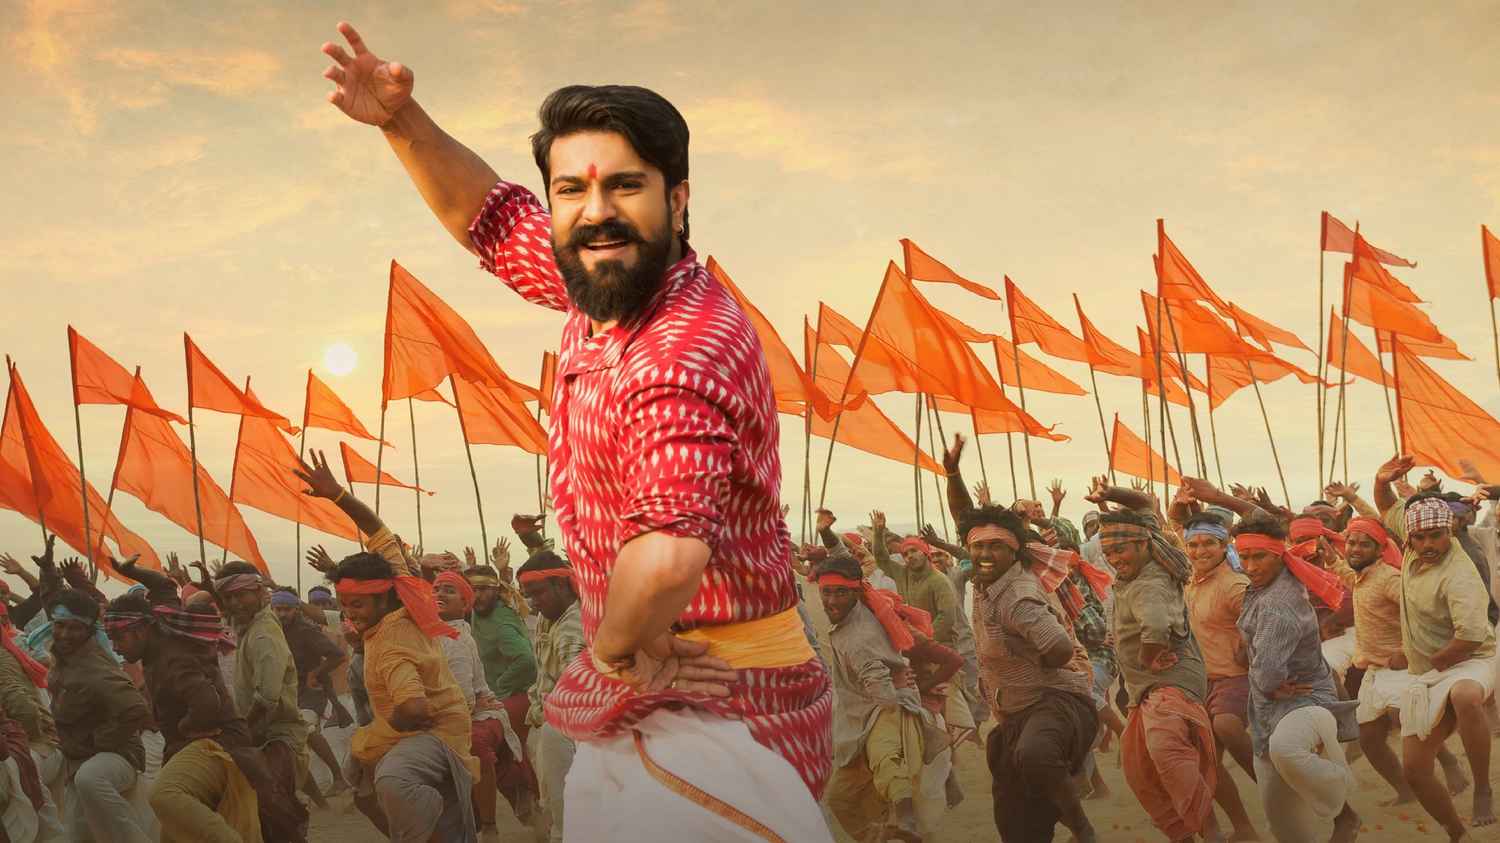 Rangasthalam release on Amazon Prime on May 13th